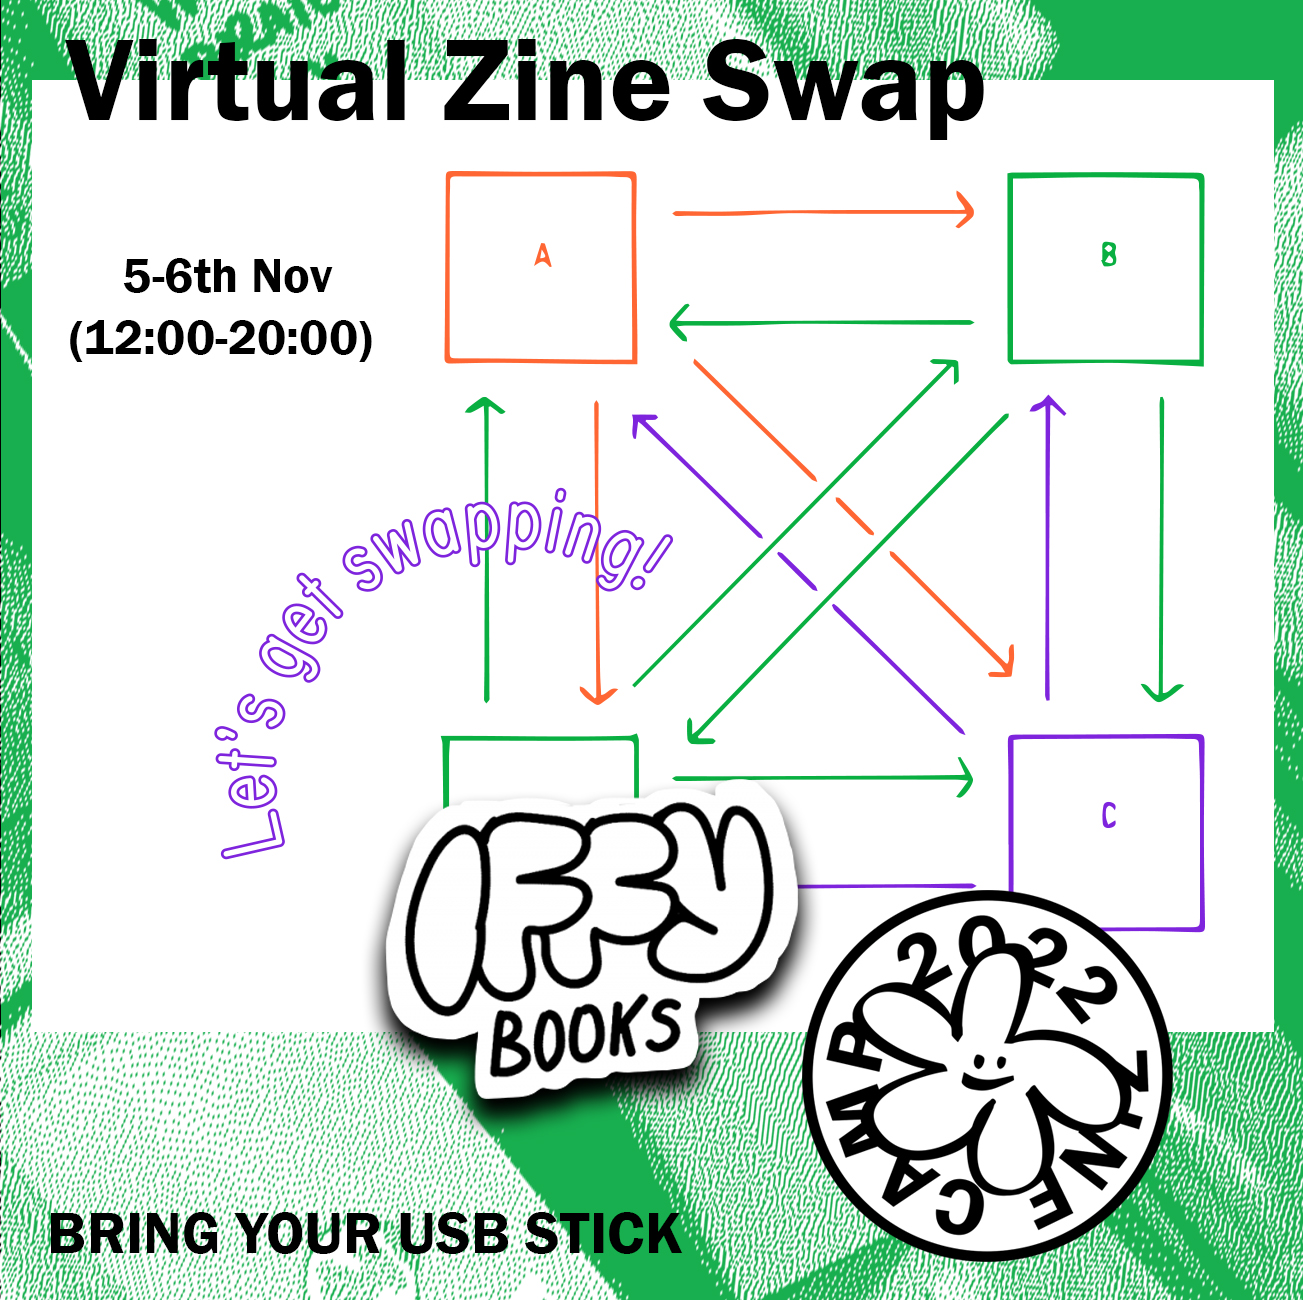 Flyer image with a green border, a background image of squares with arrows pointing between them, and the following text: Virtual Zine Swap / 5–6th Nov (12:00–20:00) / Let's get swapping! / Iffy Books / ZINE CAMP 2022 / BRING YOUR USB STICK